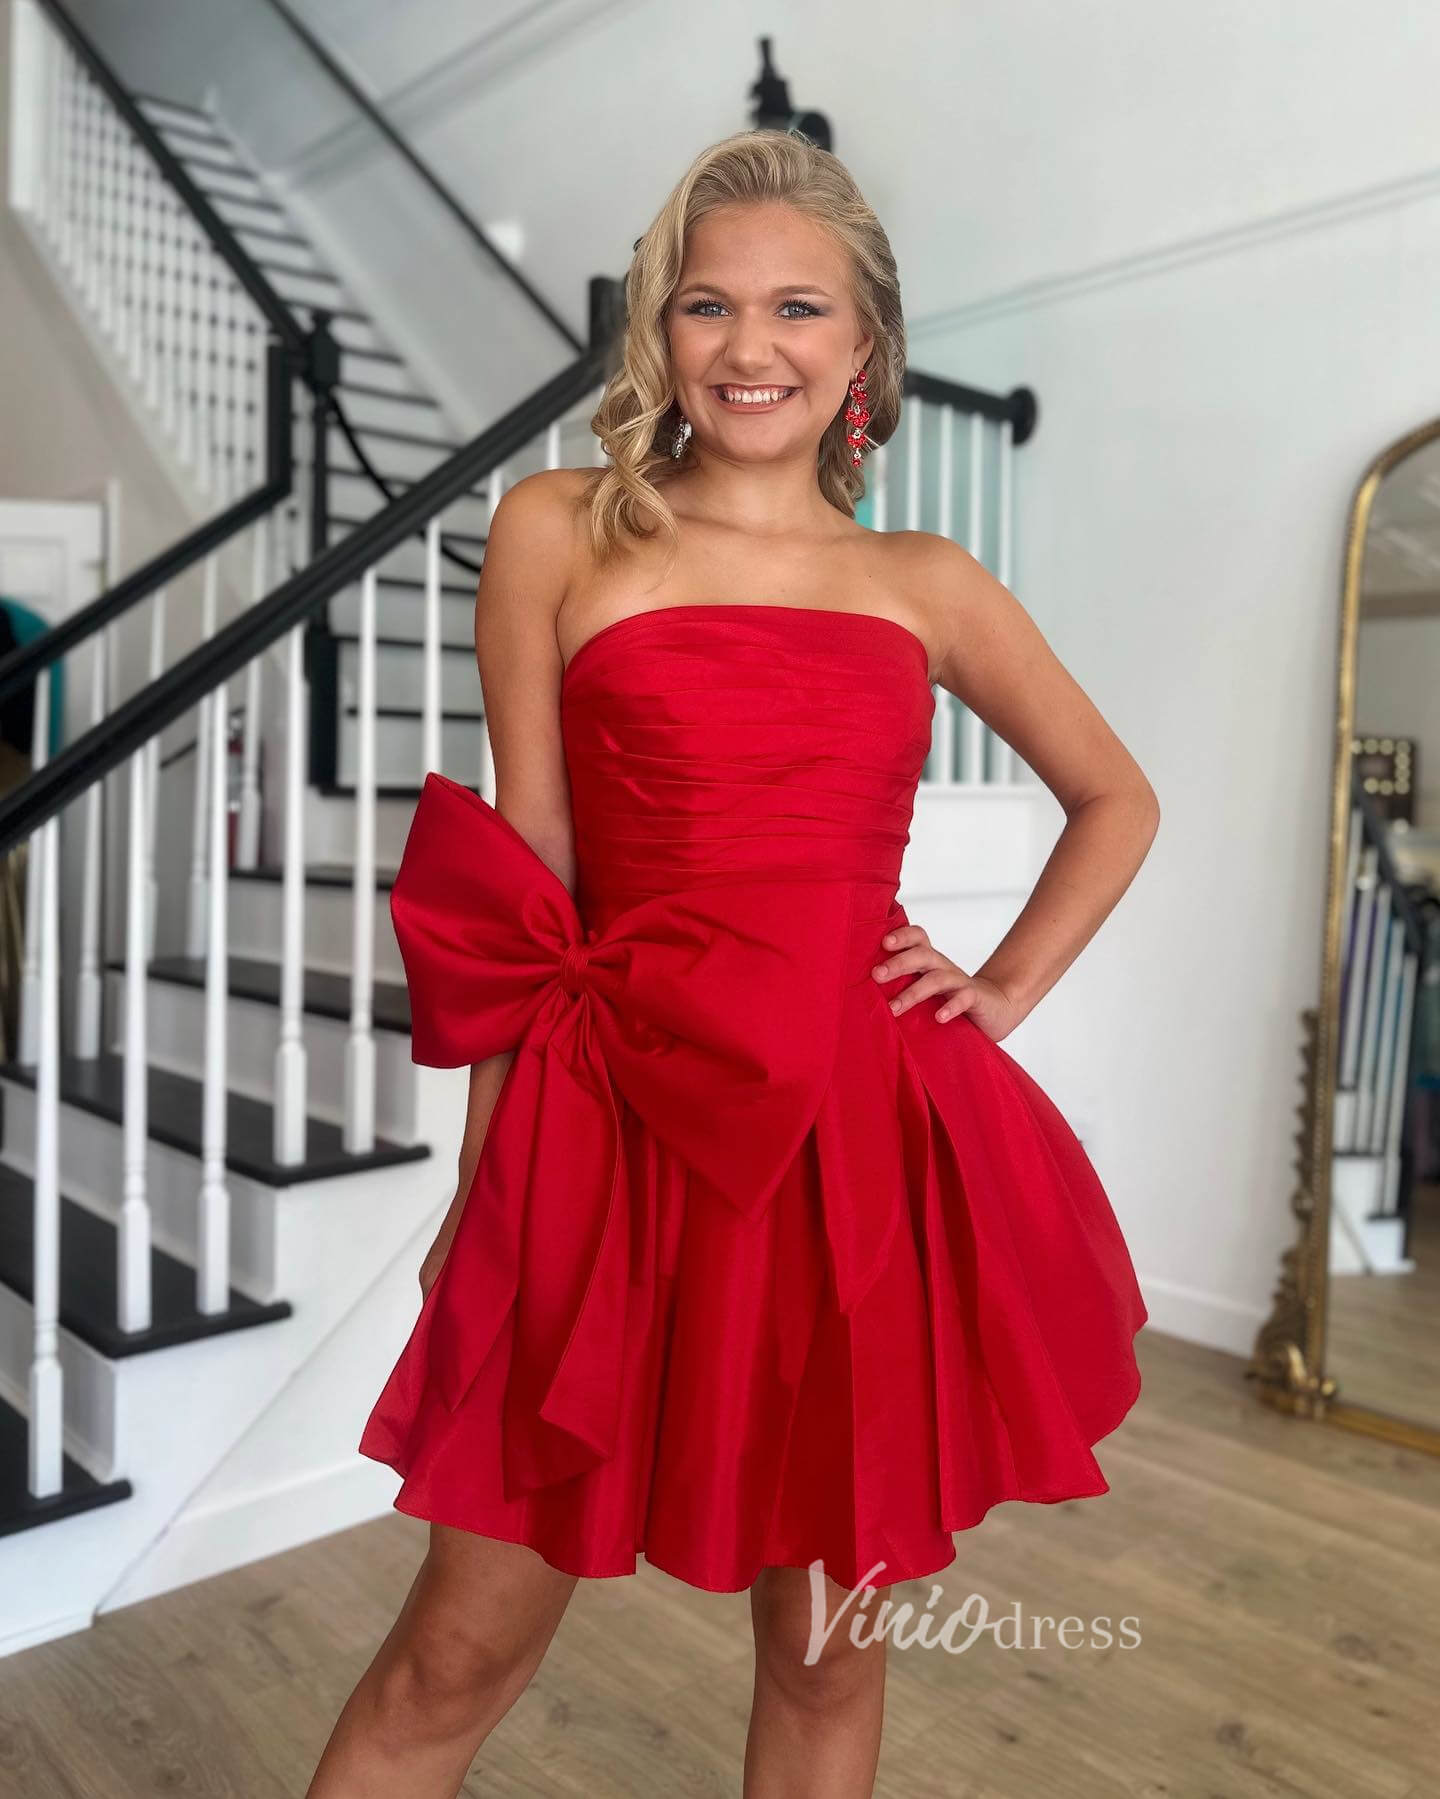 Red Strapless Satin Homecoming Dresses Bow-Tie Short Prom Dress SD1640-prom dresses-Viniodress-Viniodress